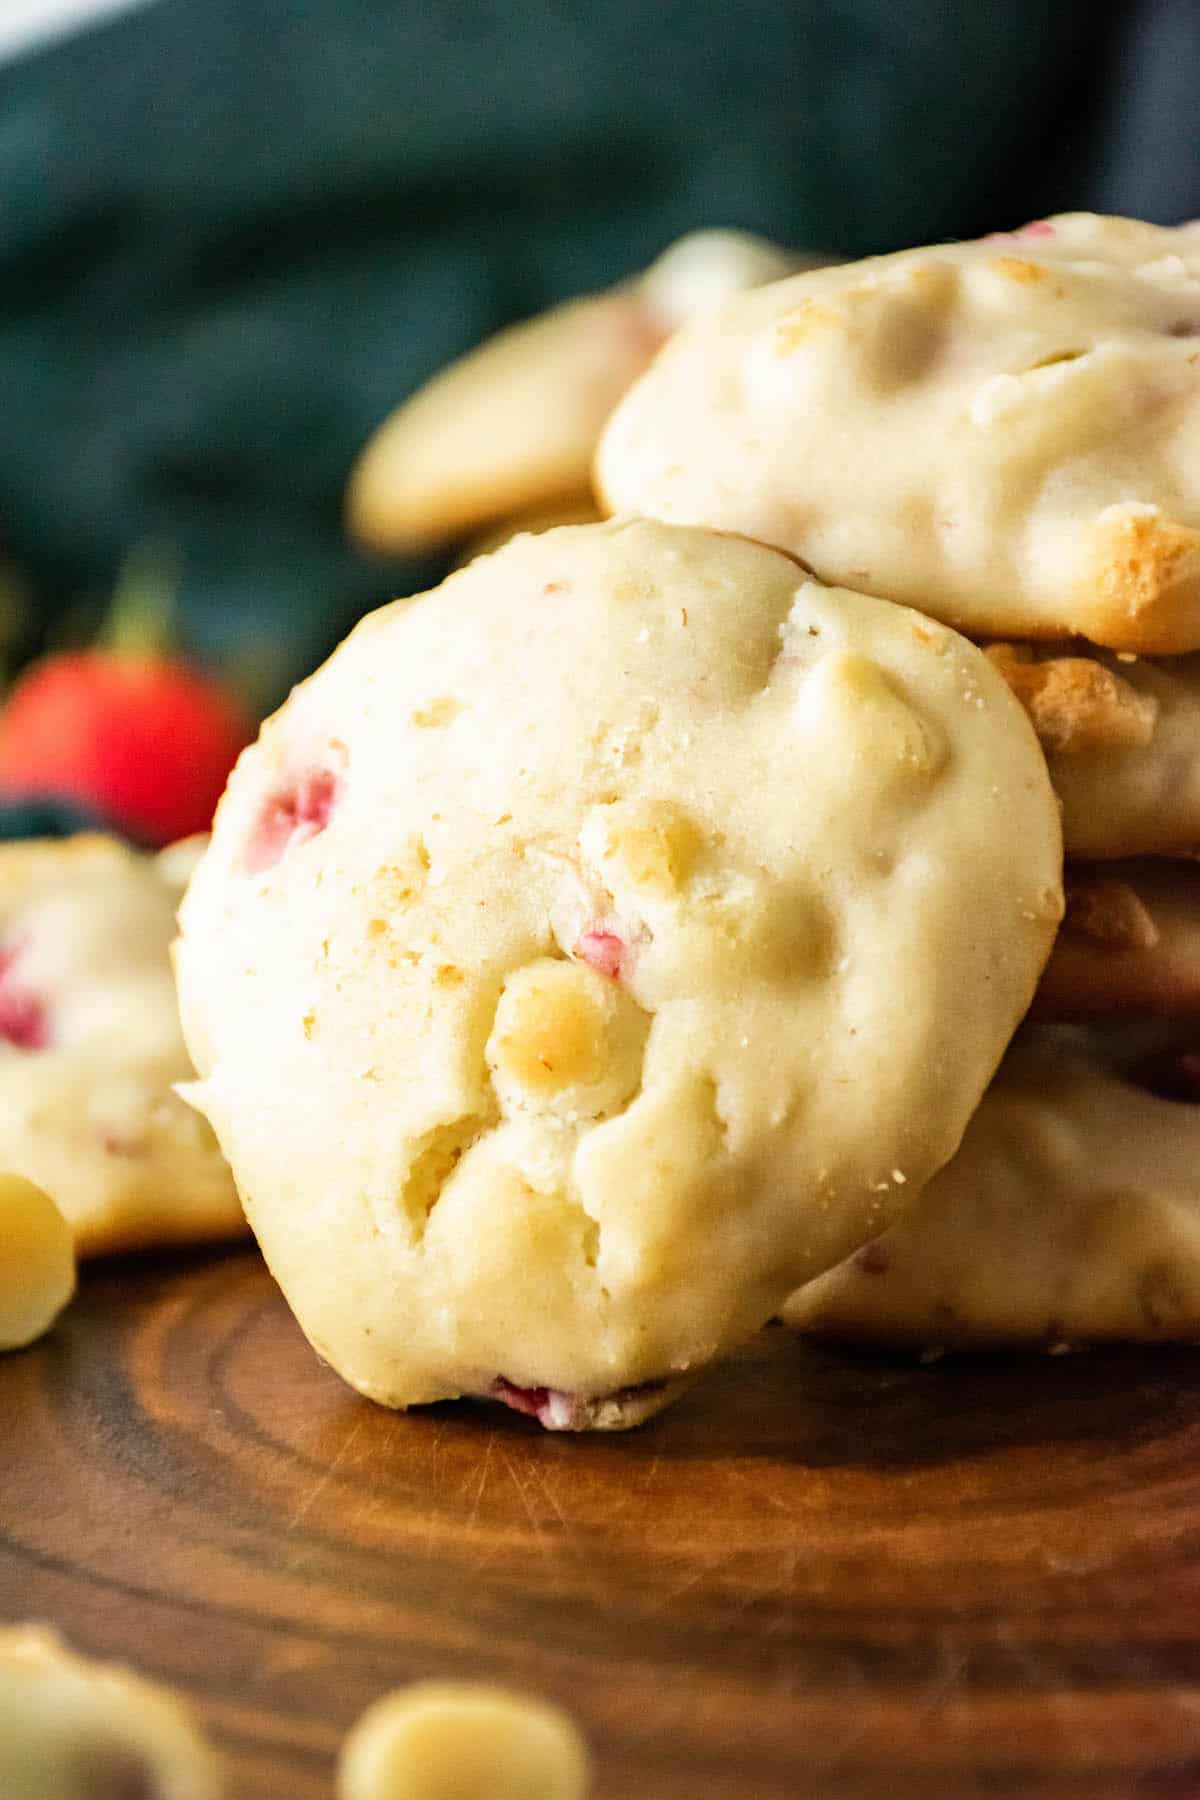 Strawberry cheesecake cookies on a wood slab.